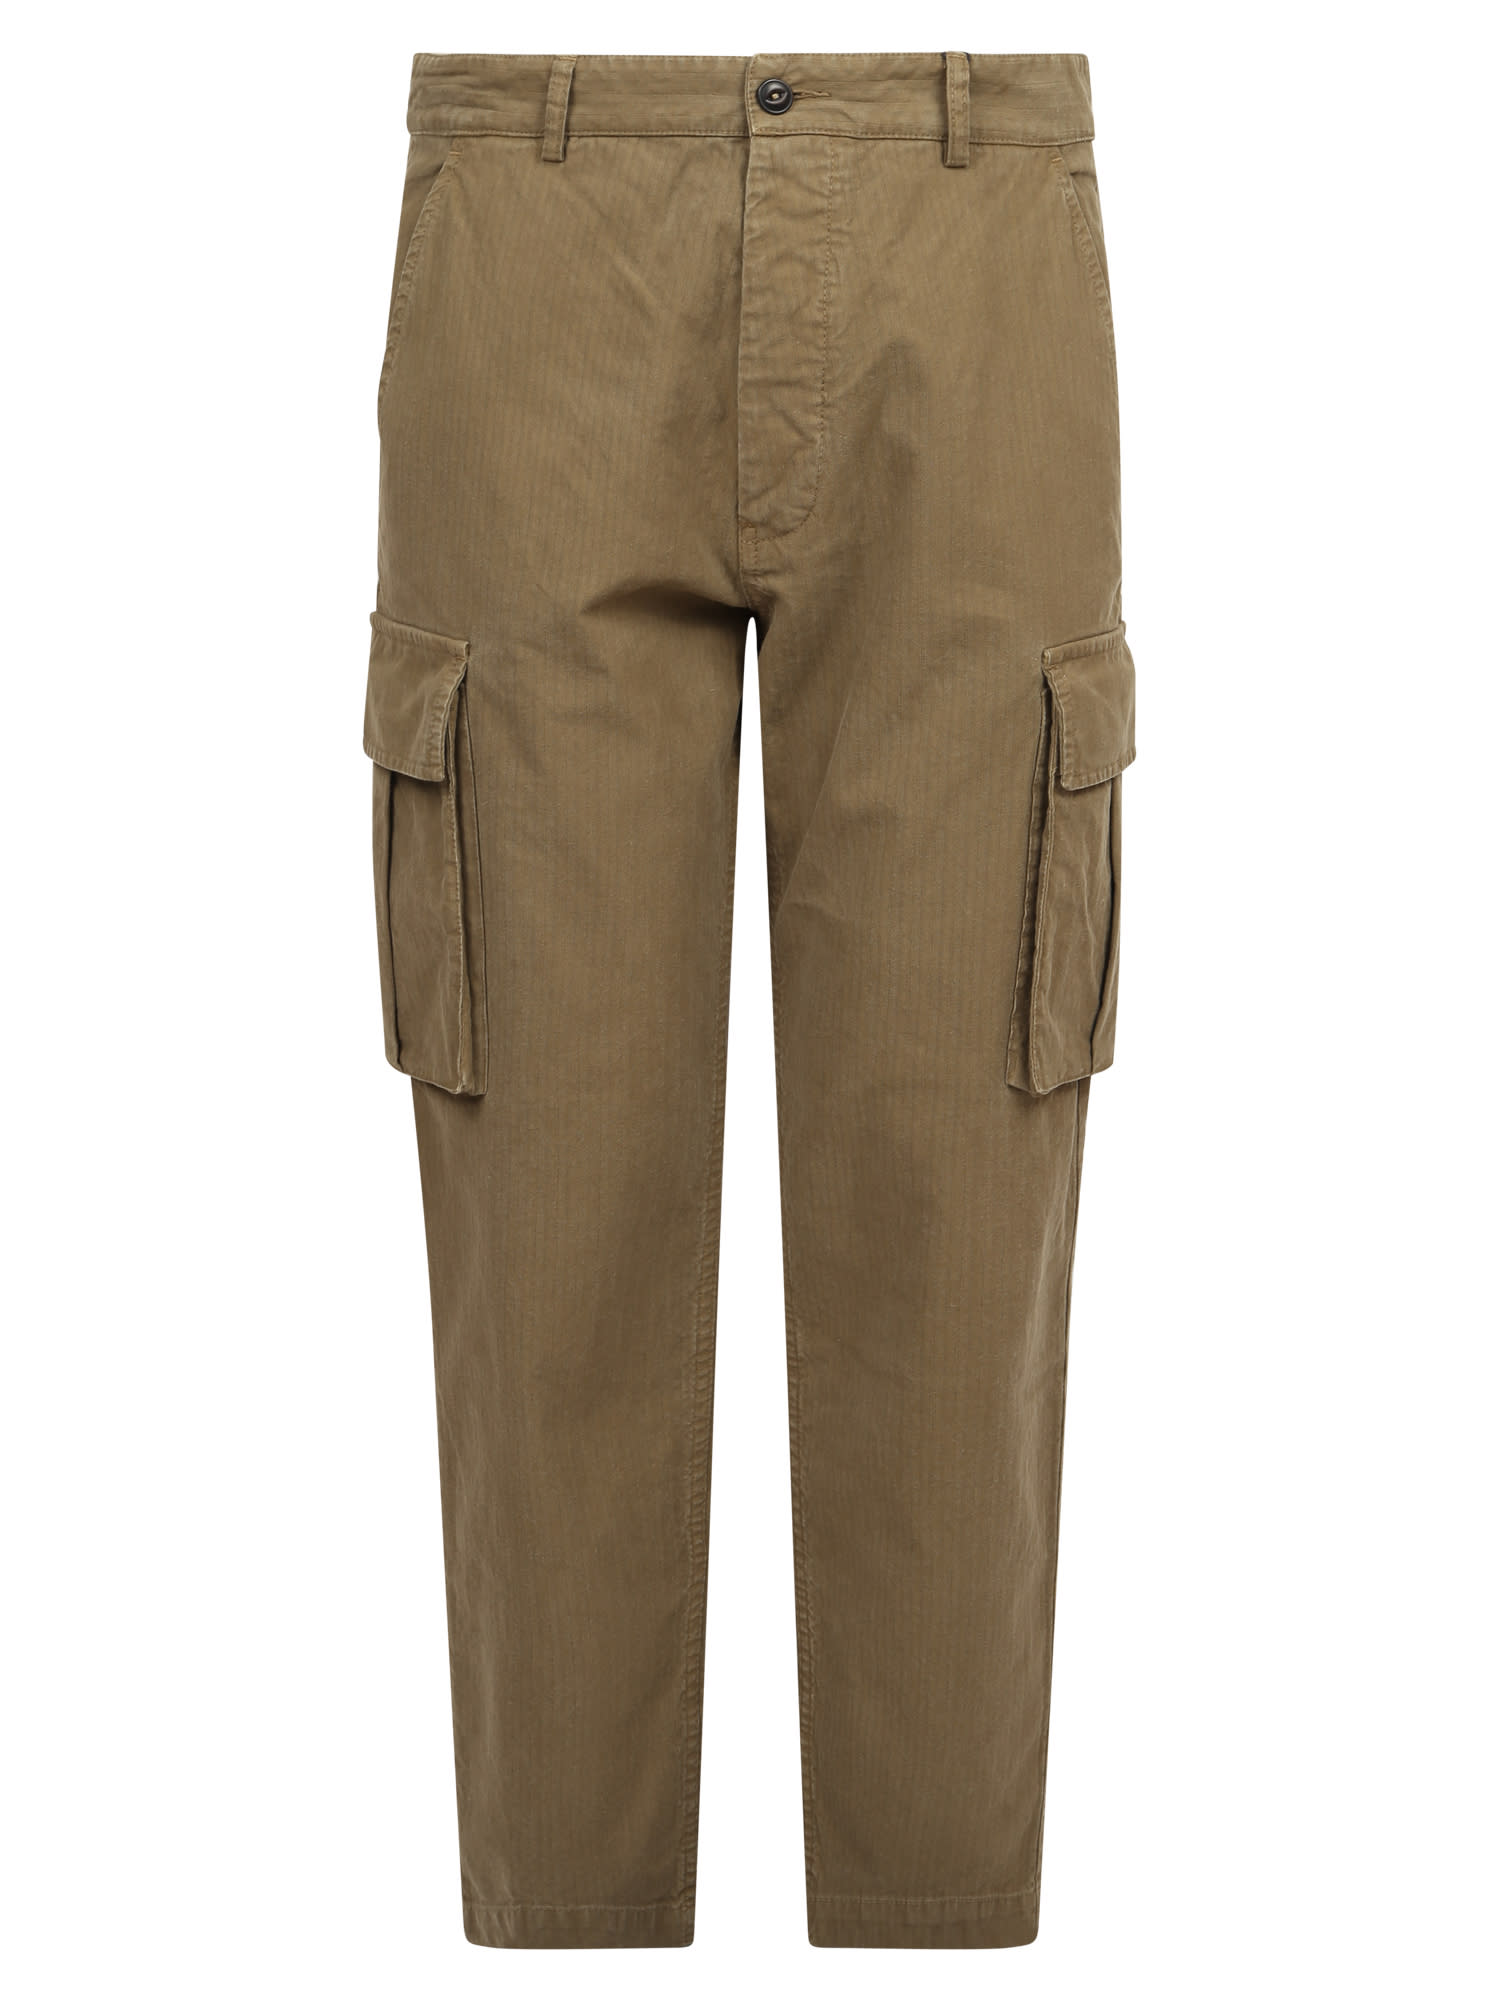 Original Vintage Style Green Trousers